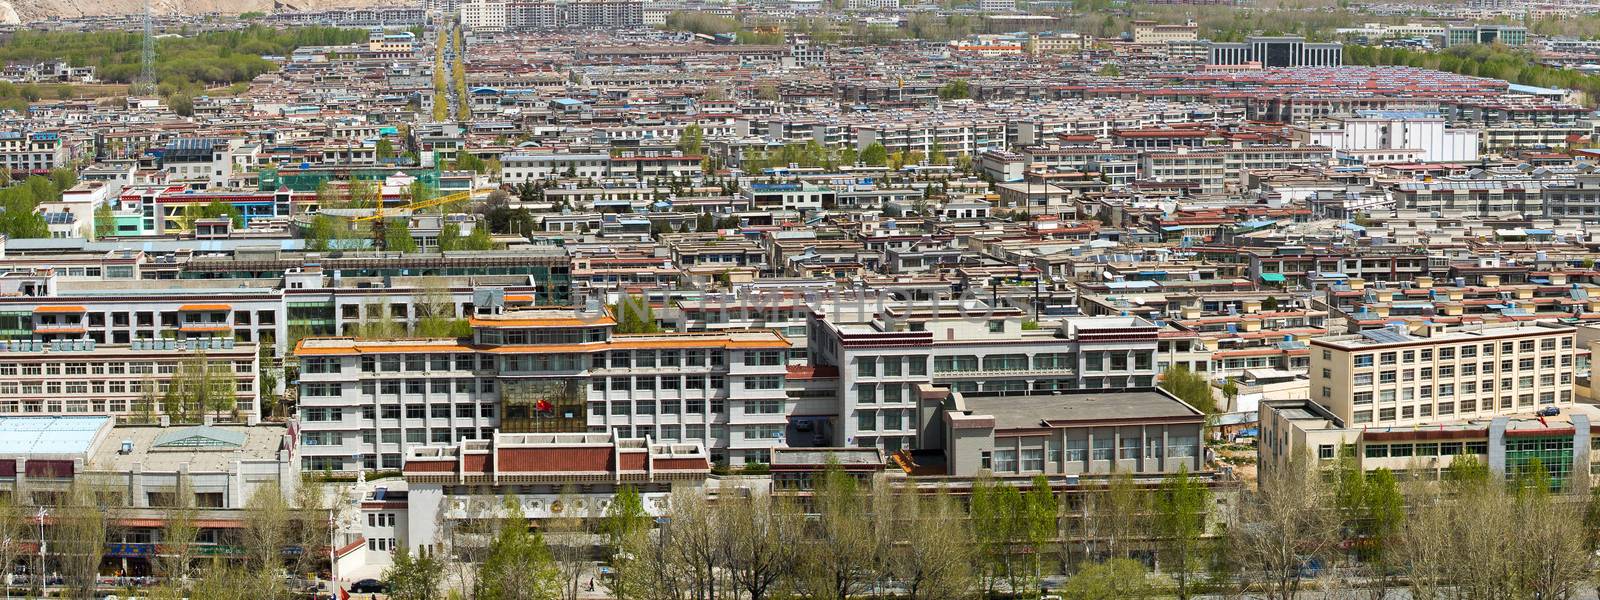 The new downtown of Lhasa, Capital of Tibet in China